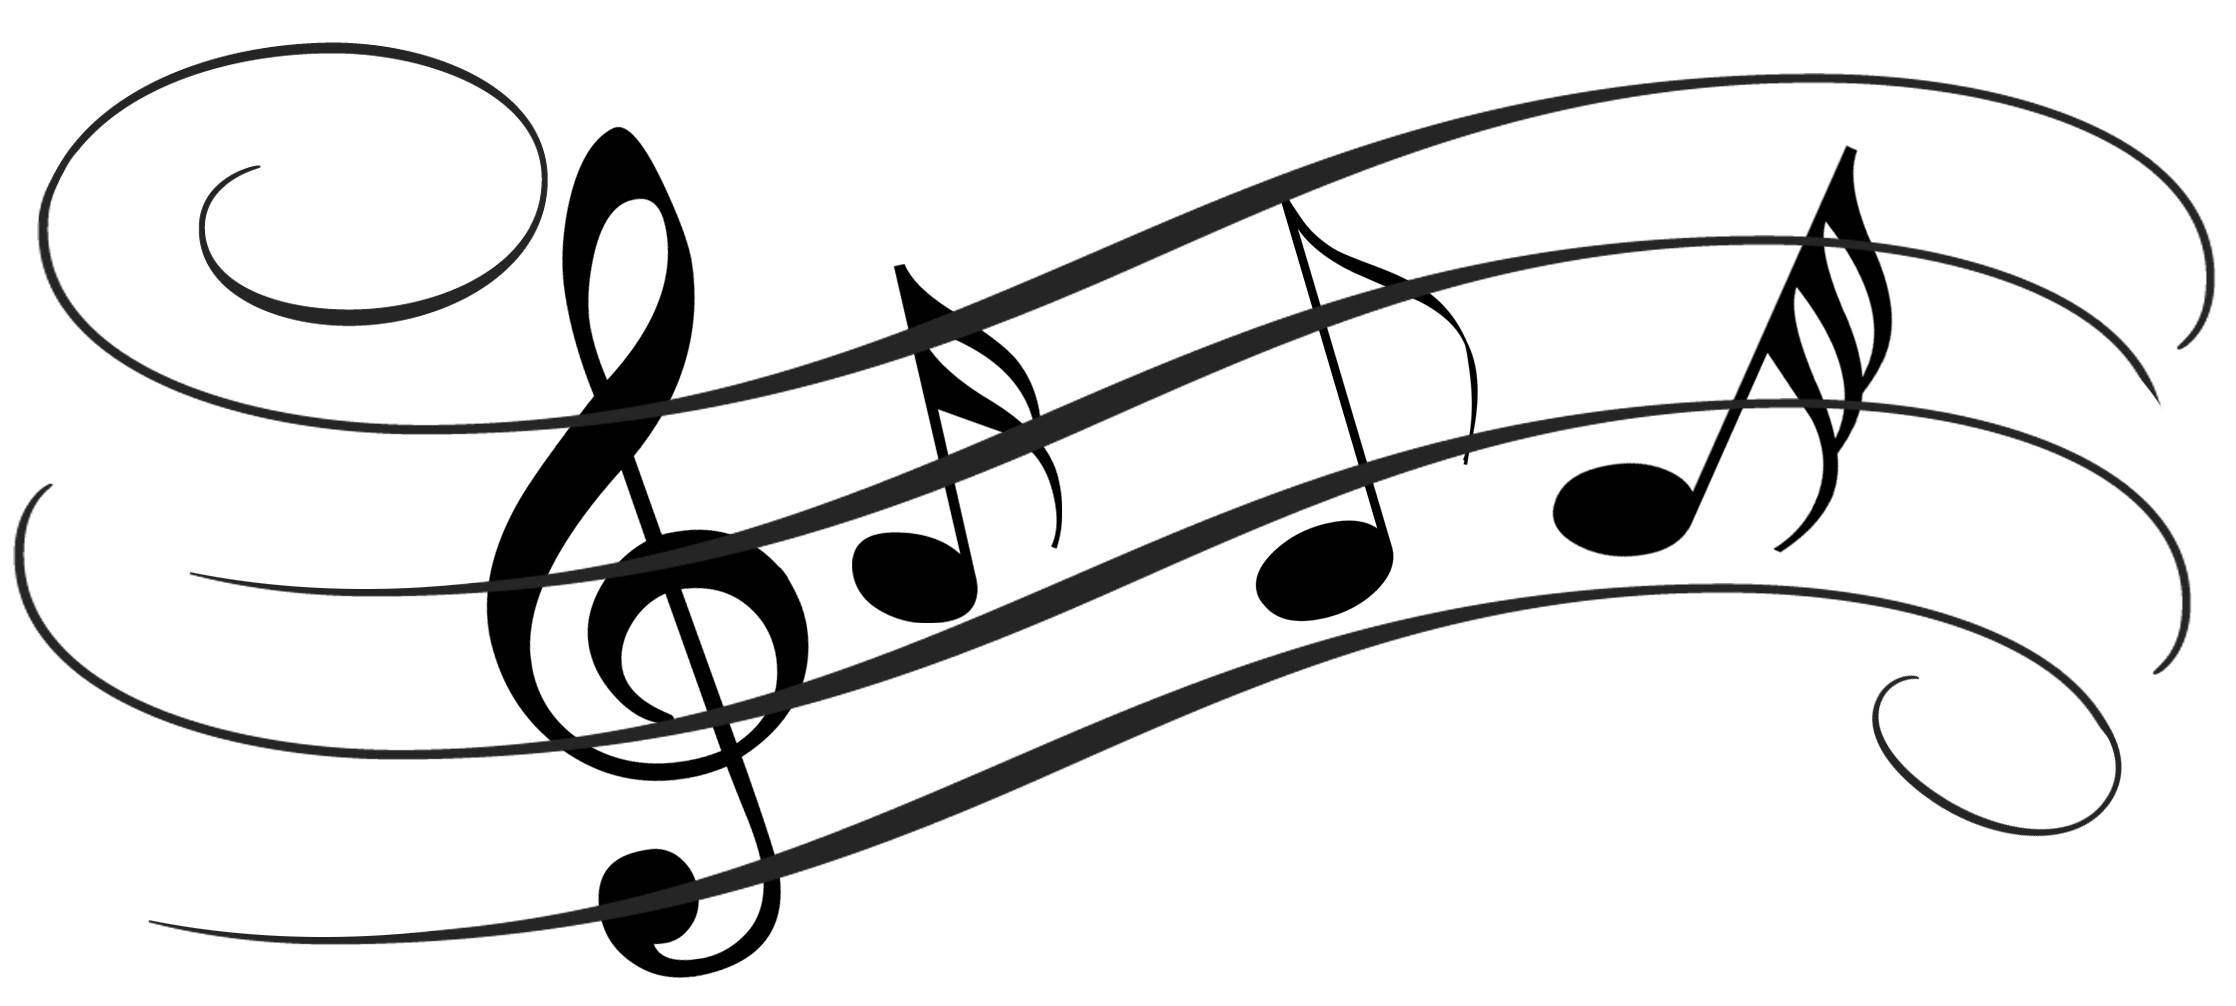 Drawings Of Musical Notes - Clipart library